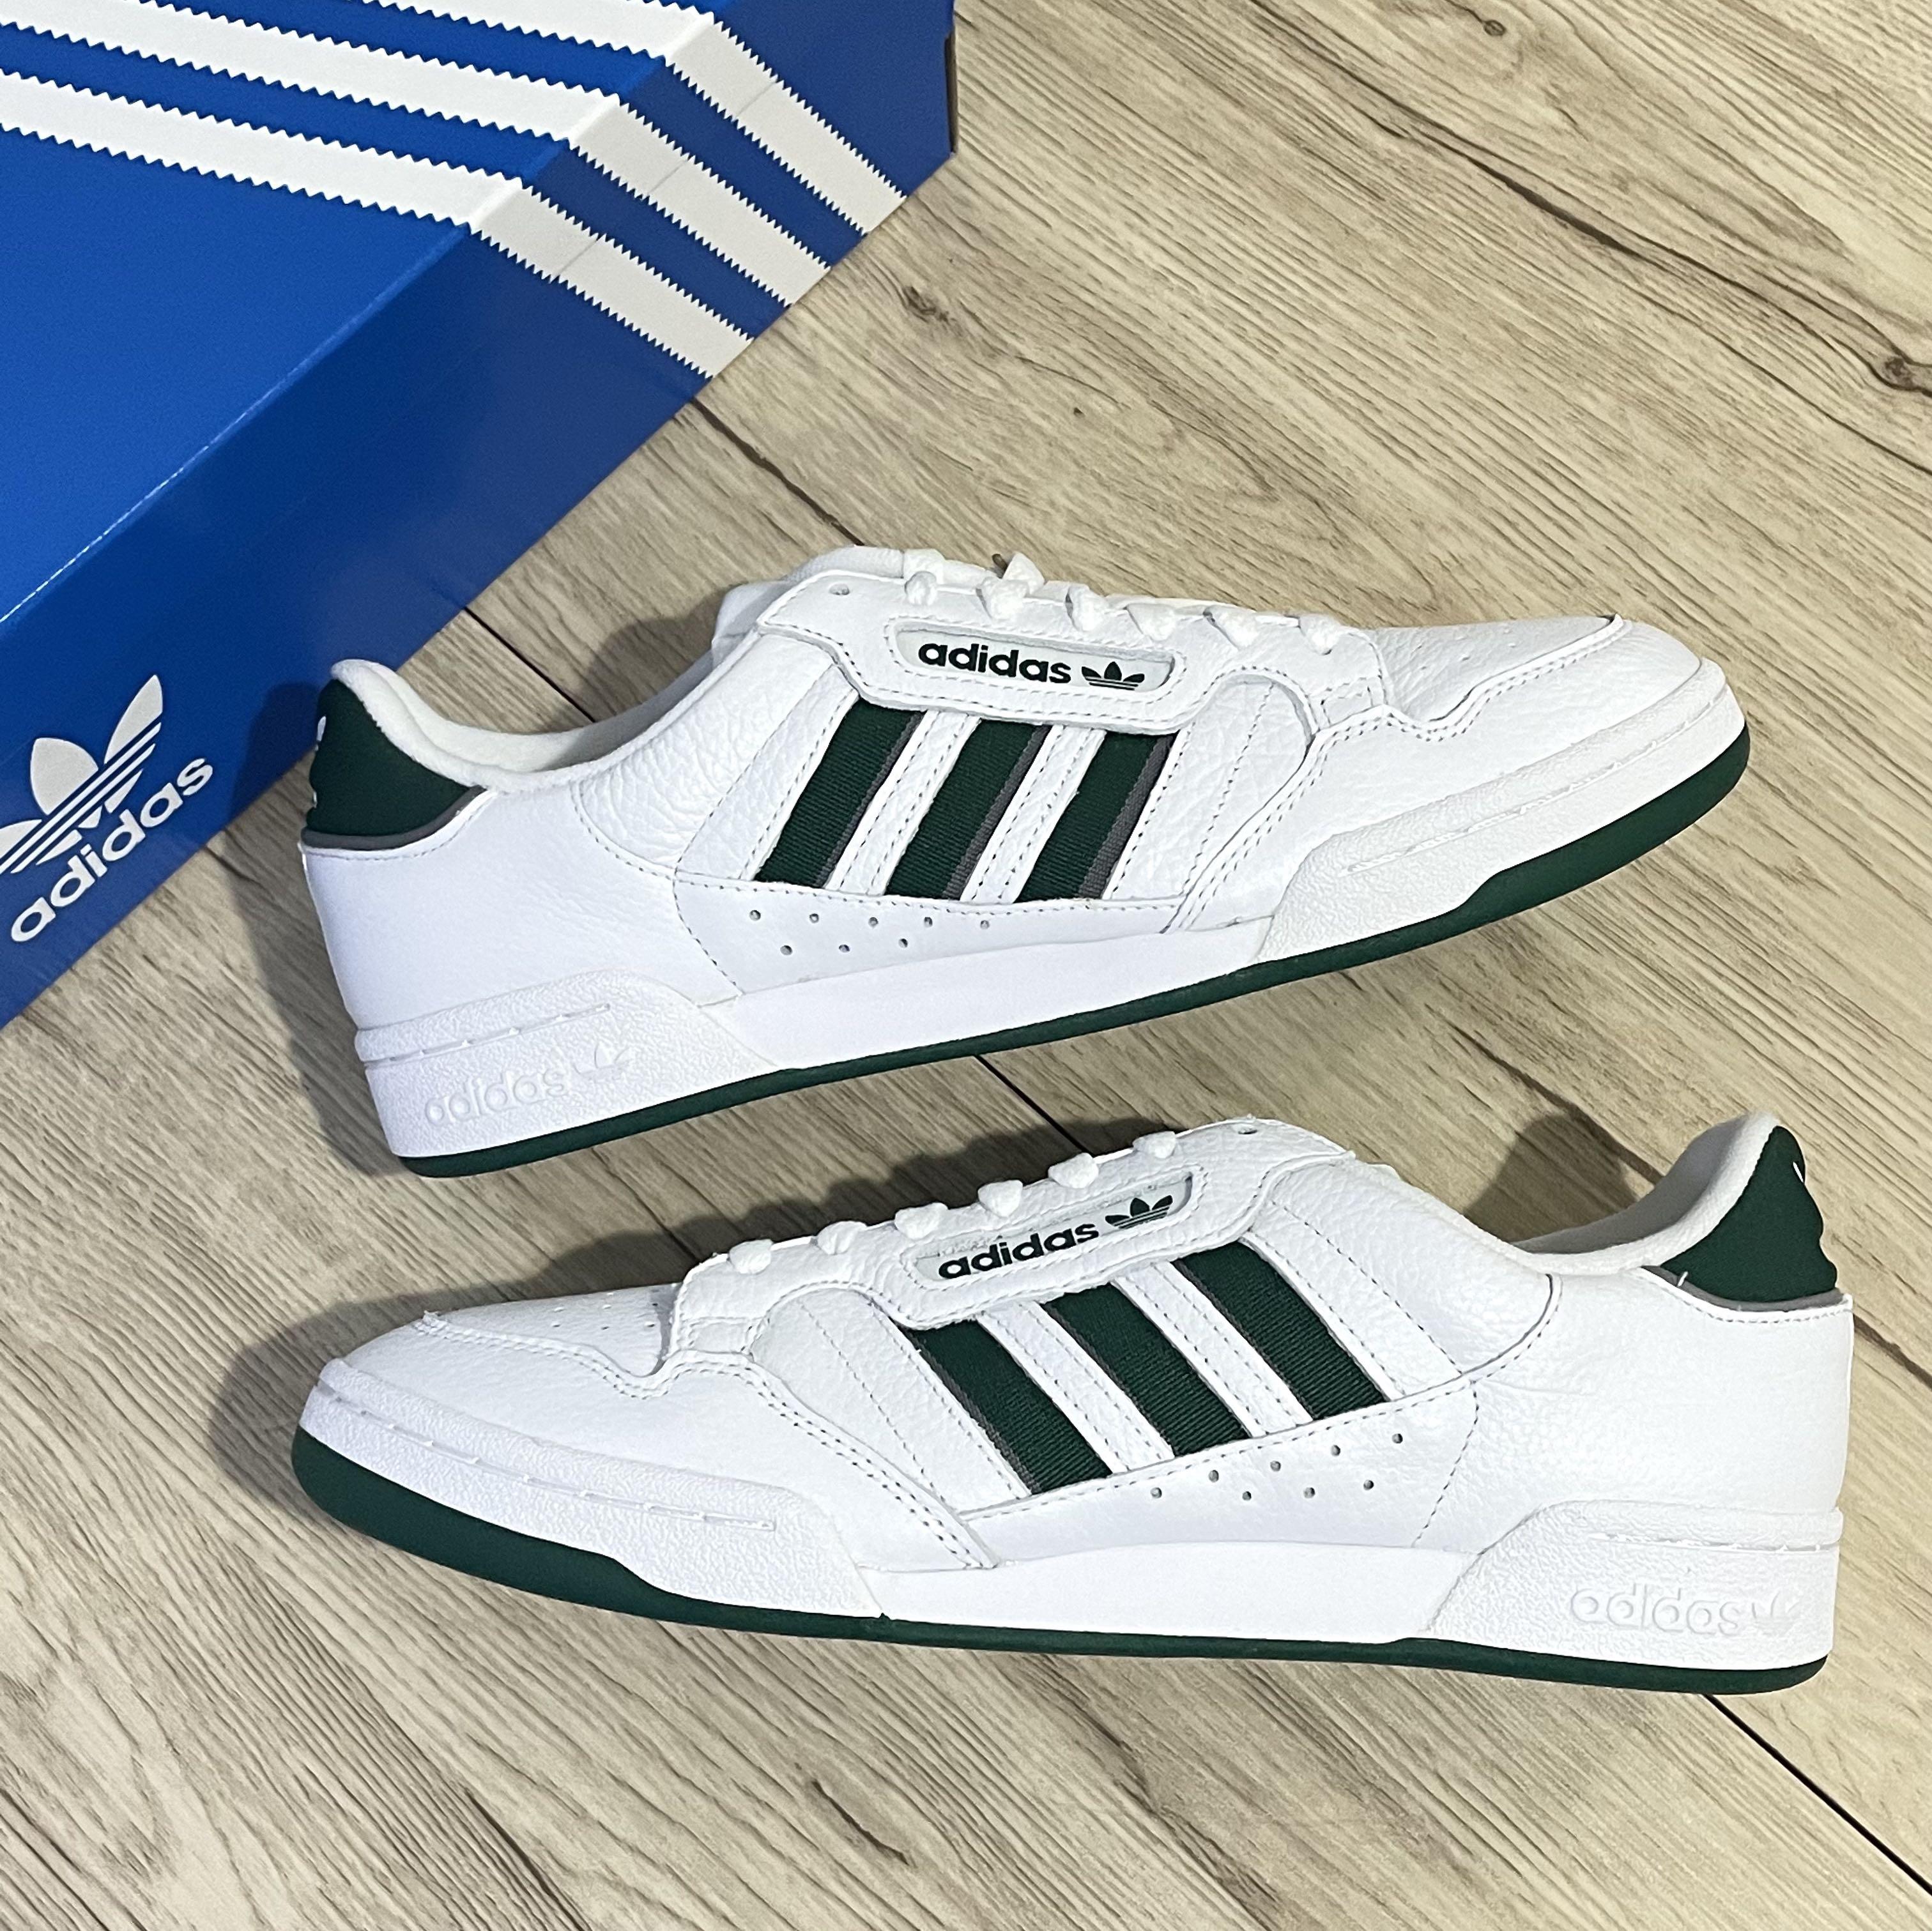 Adidas Continental 80 Stripes Green Shoes Men Sneakers BRAND NEW, Men's Footwear, Sneakers on Carousell